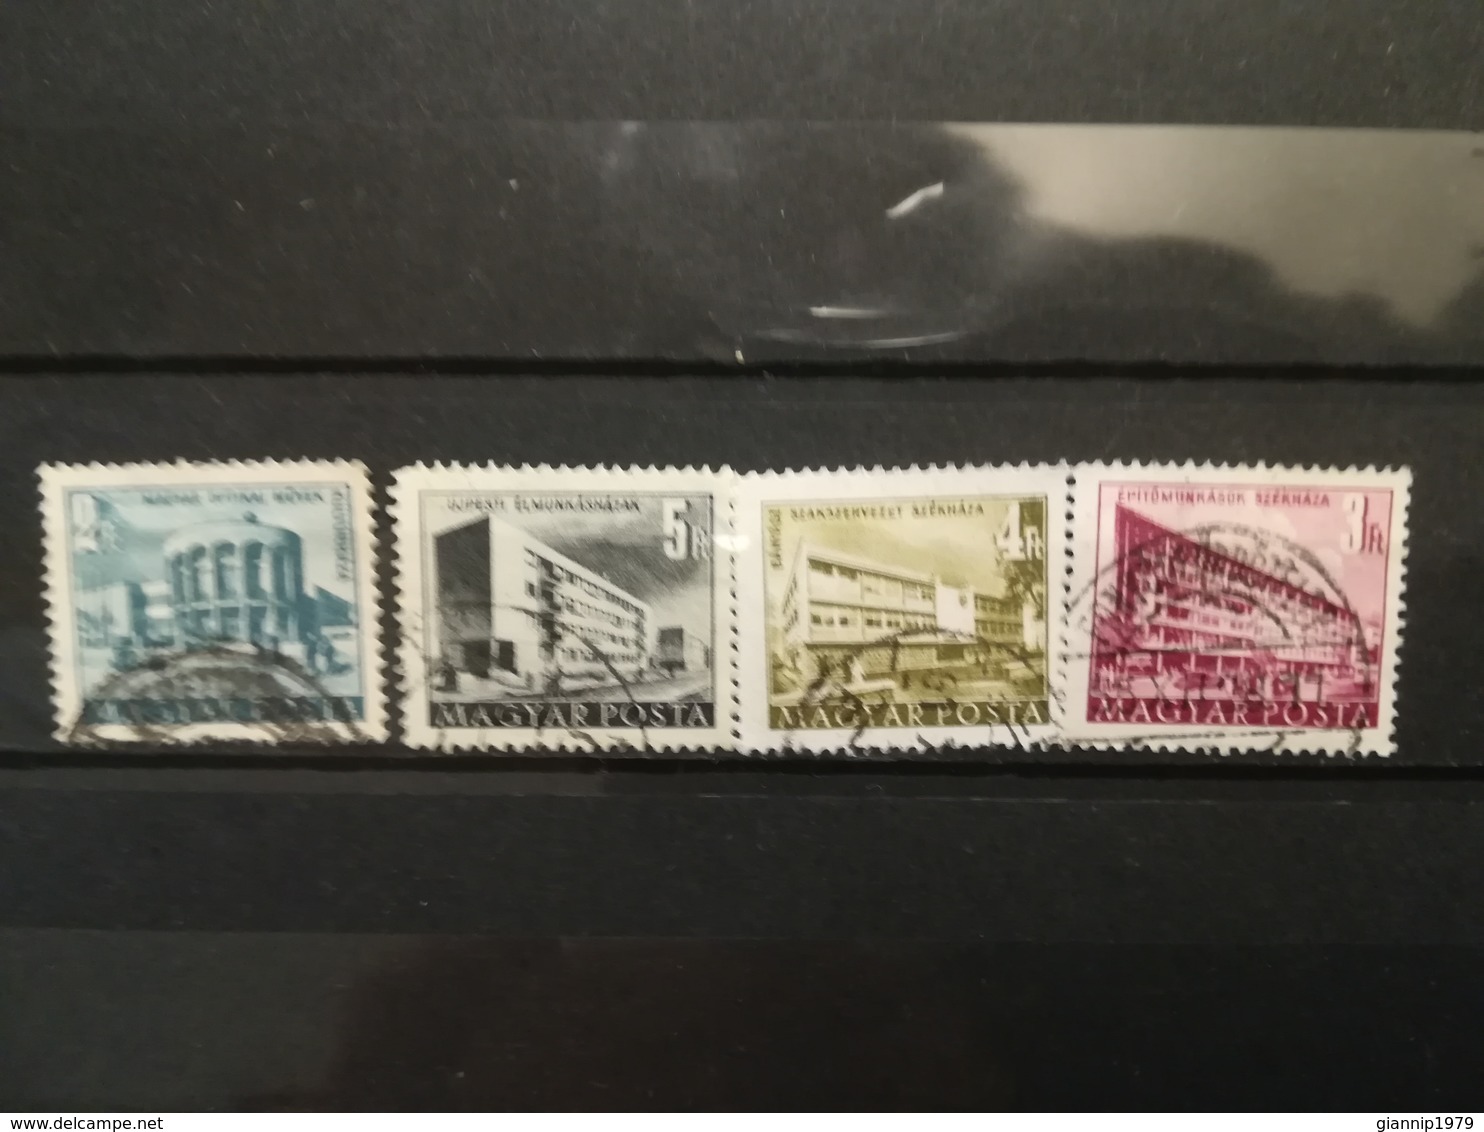 FRANCOBOLLI STAMPS UNGHERIA MAGYAR POSTA 1950 - 1953 USED  PLAN FIVE PIANO QUINQUENNALE HUNGARY - Usati